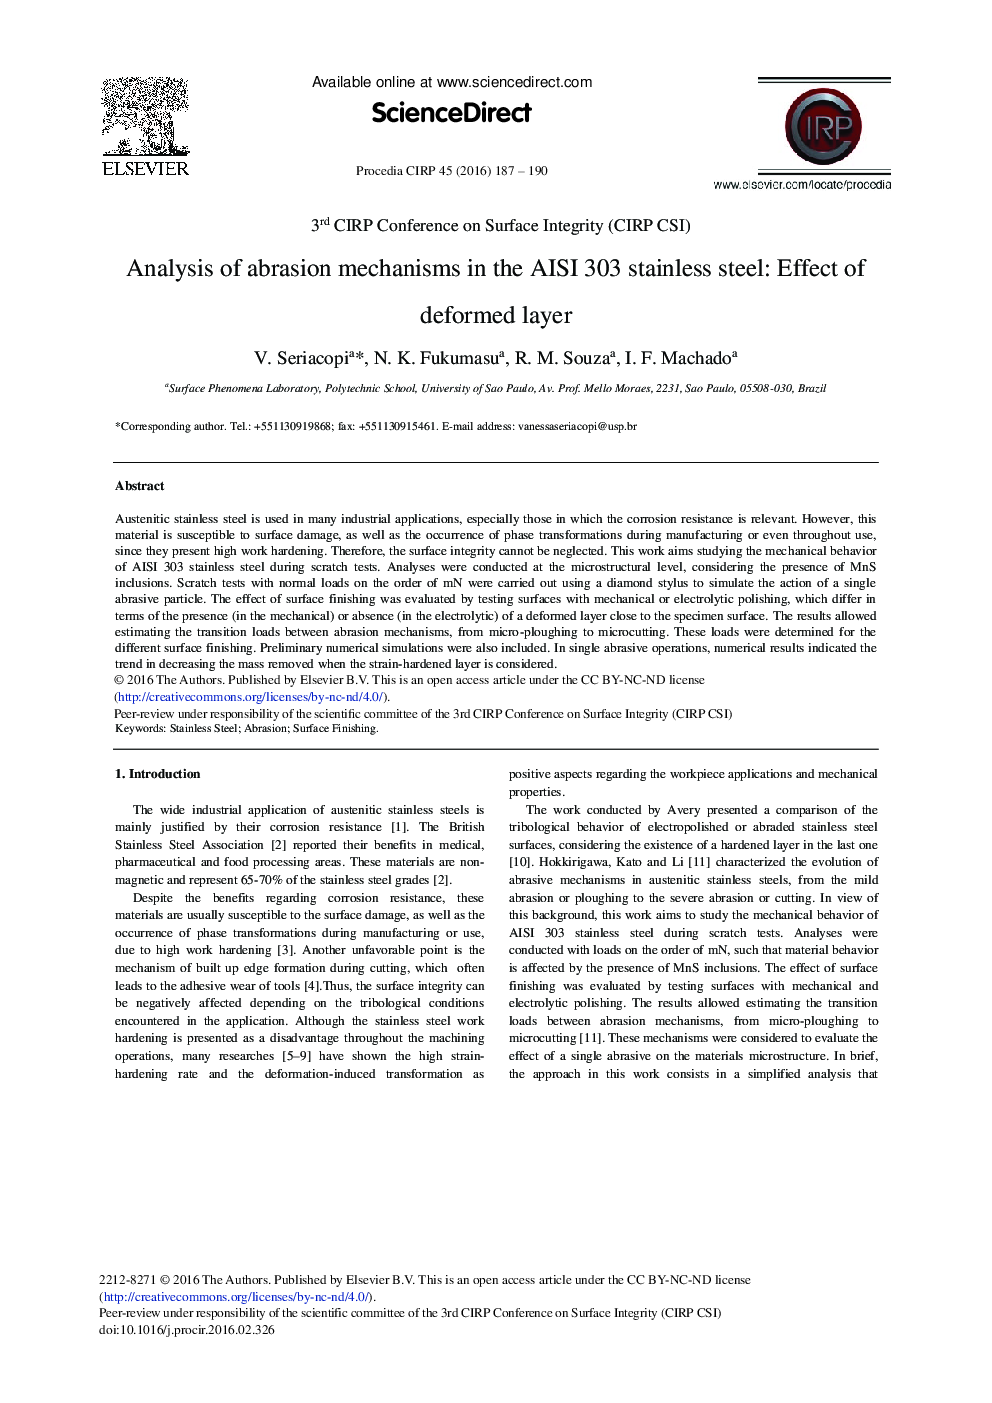 Analysis of Abrasion Mechanisms in the AISI 303 Stainless Steel: Effect of Deformed Layer 